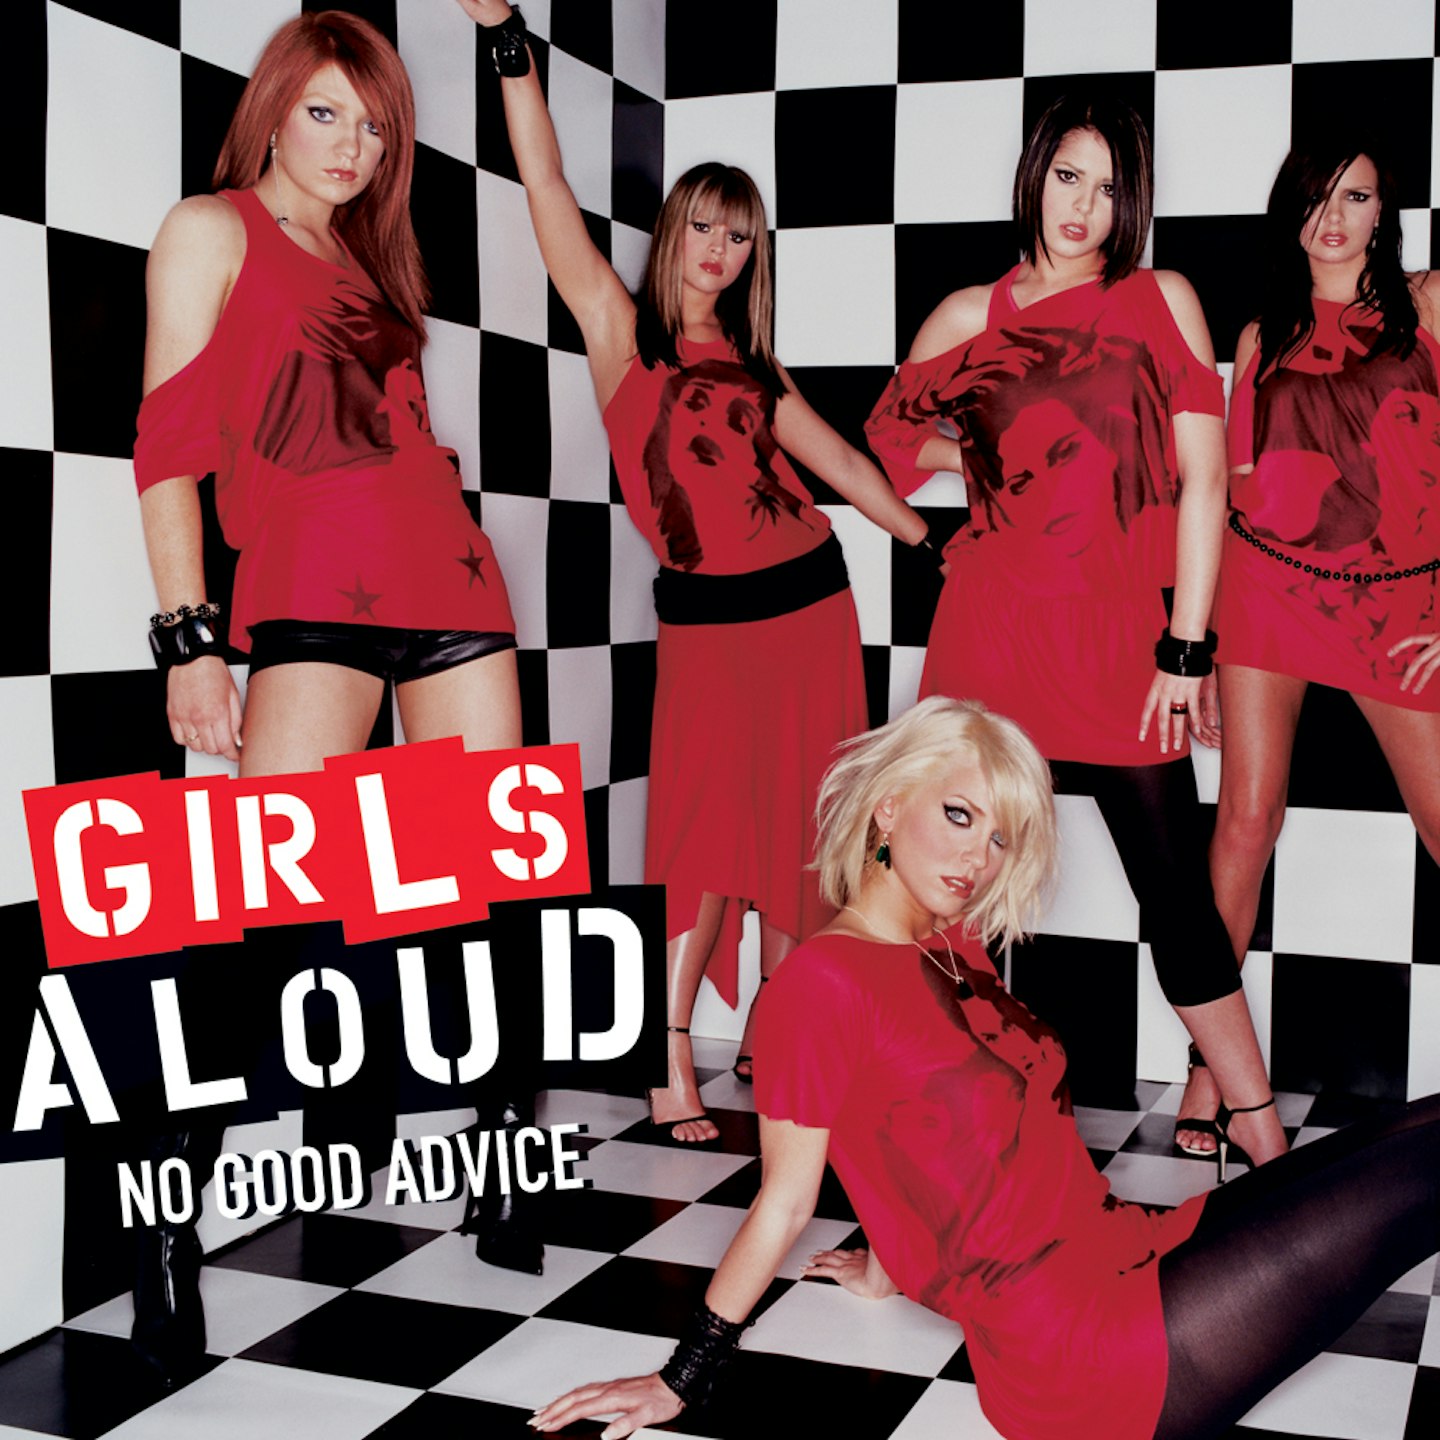 Throwback To Girls Aloud Album Covers